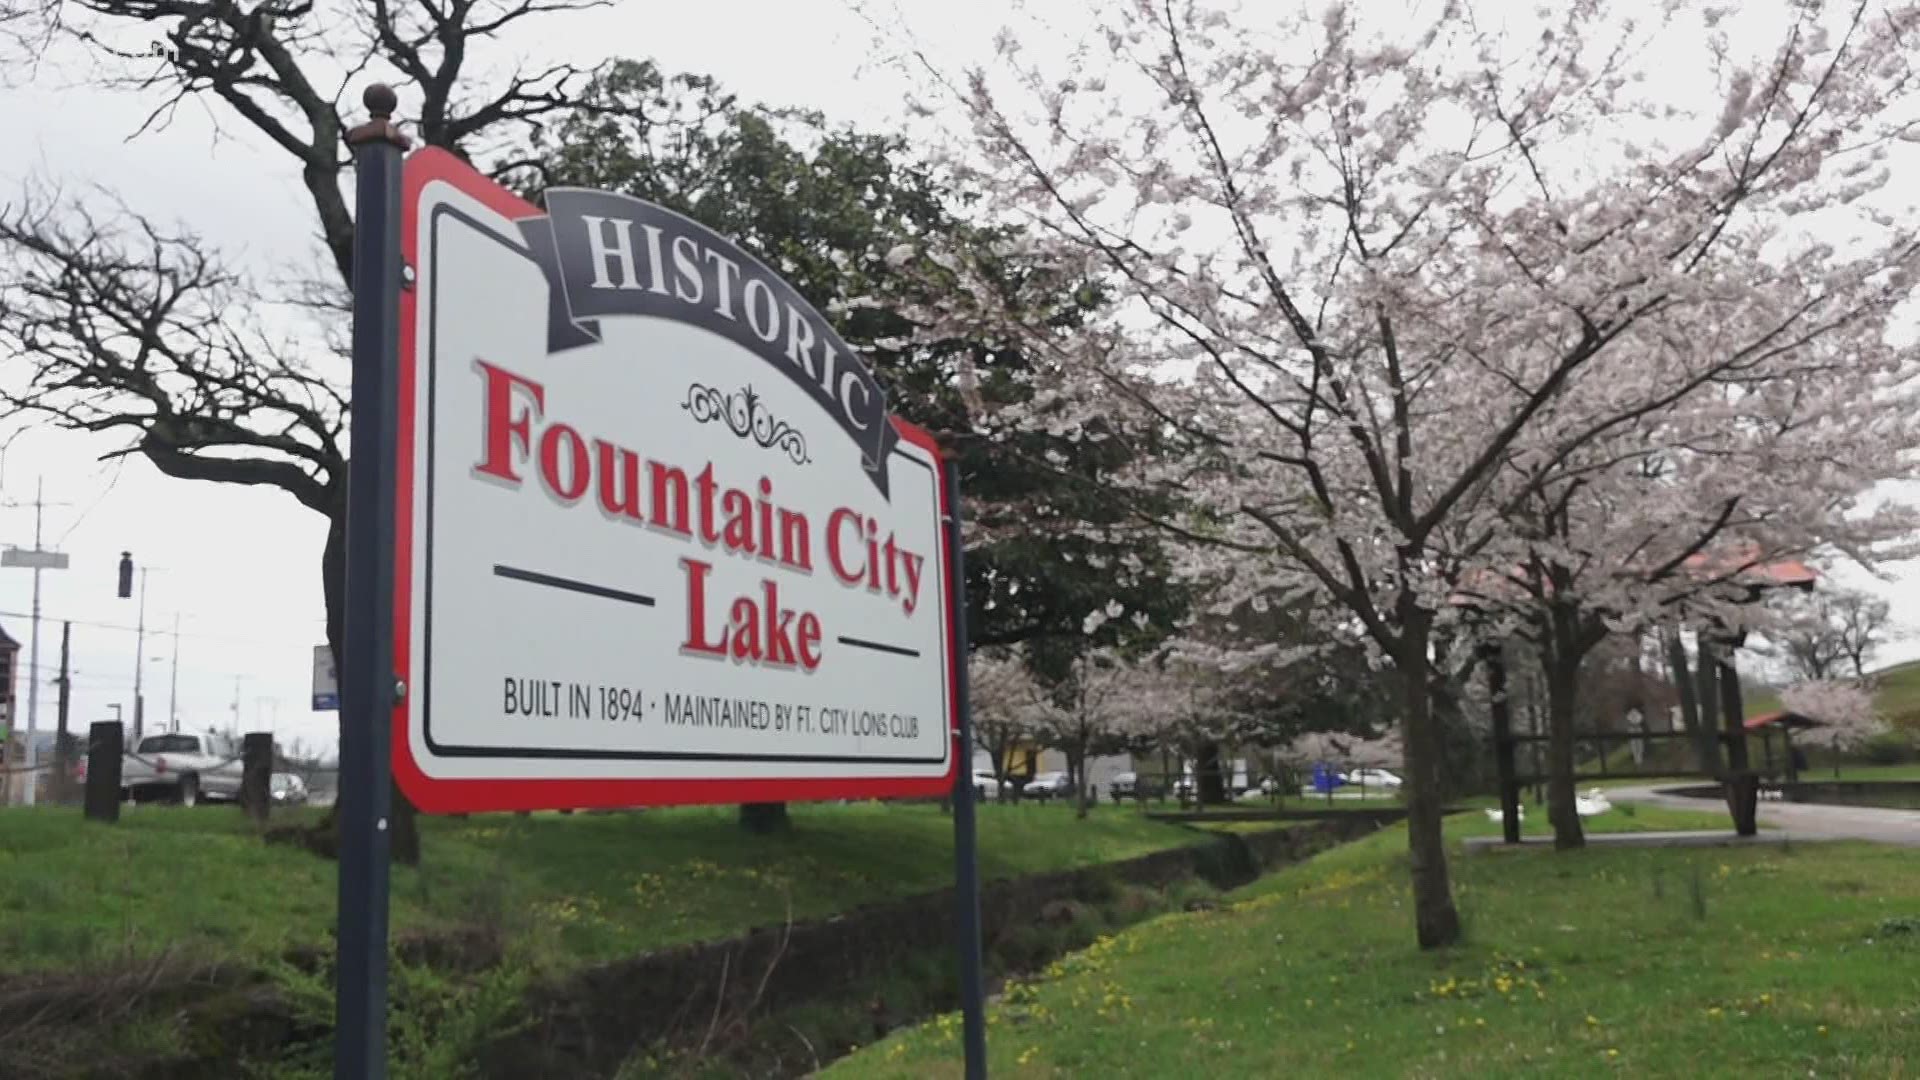 The Lions Club is donating the park and lake it has managed for more than half a century to Knoxville. The city said it will continue investing in improvements.